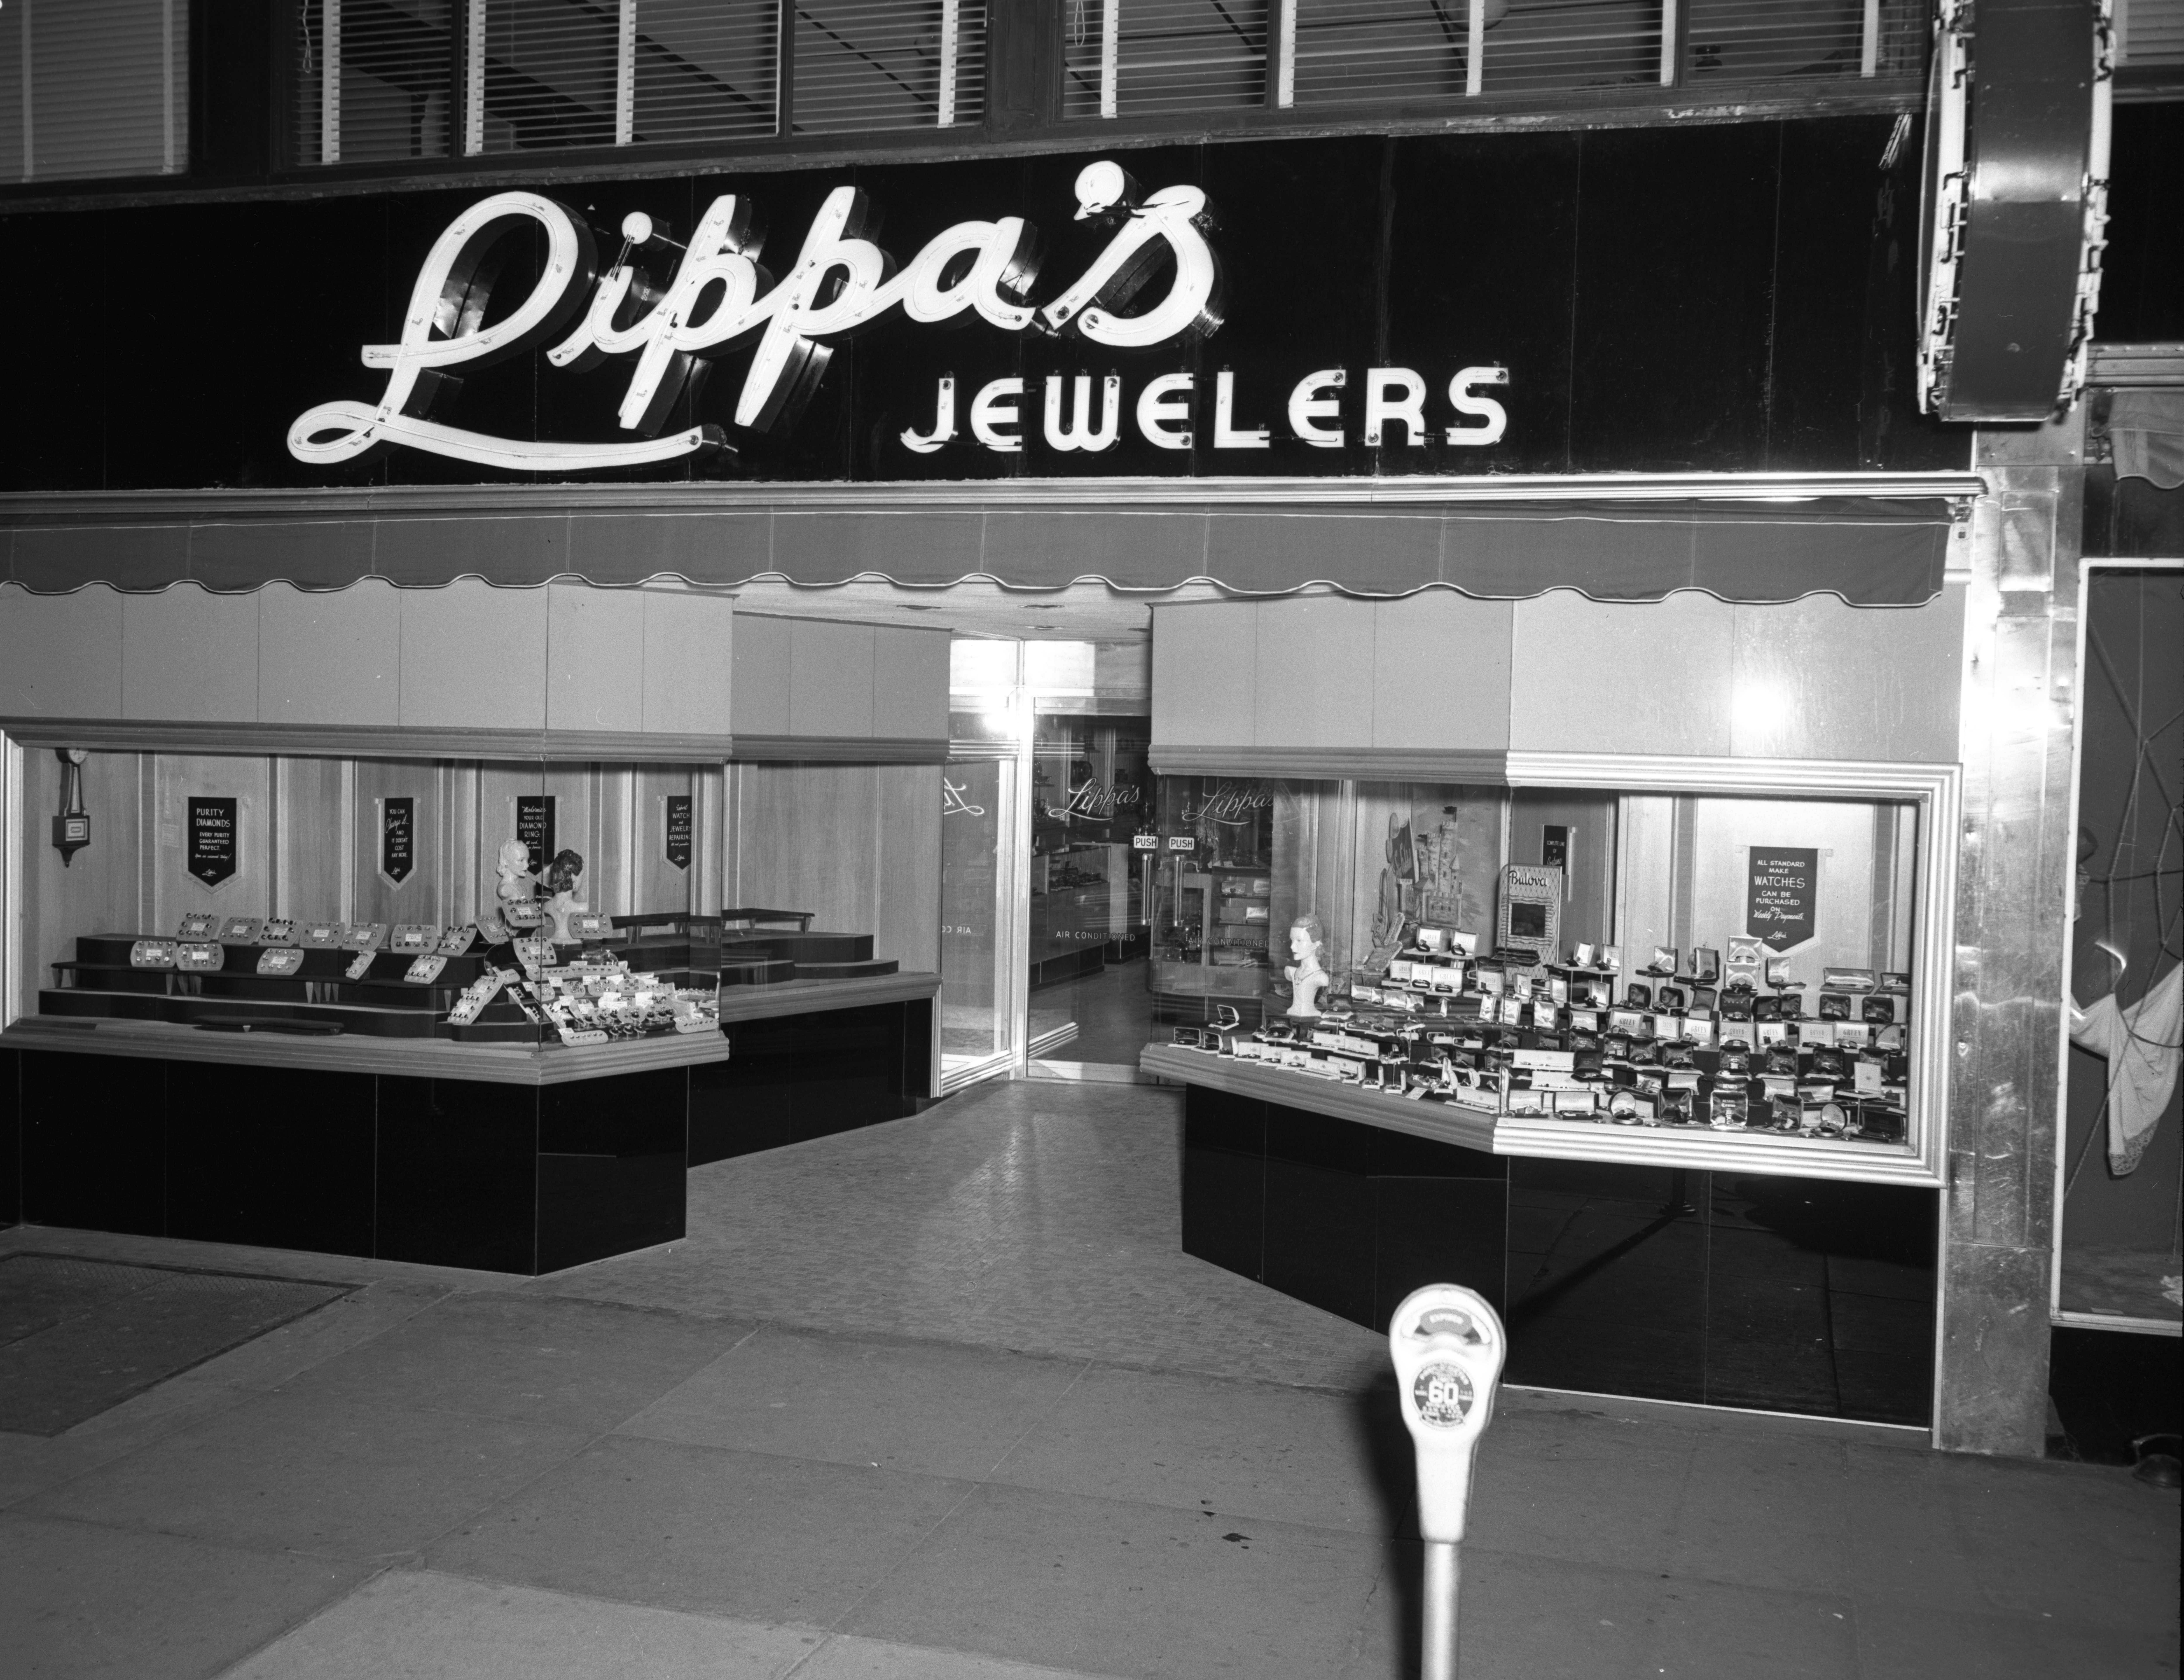 Lippa's Jewelers storefront photographer at night. Black and white photo showing neatly arranged jewelry boxes and cases on display behind the storefront glass windows.